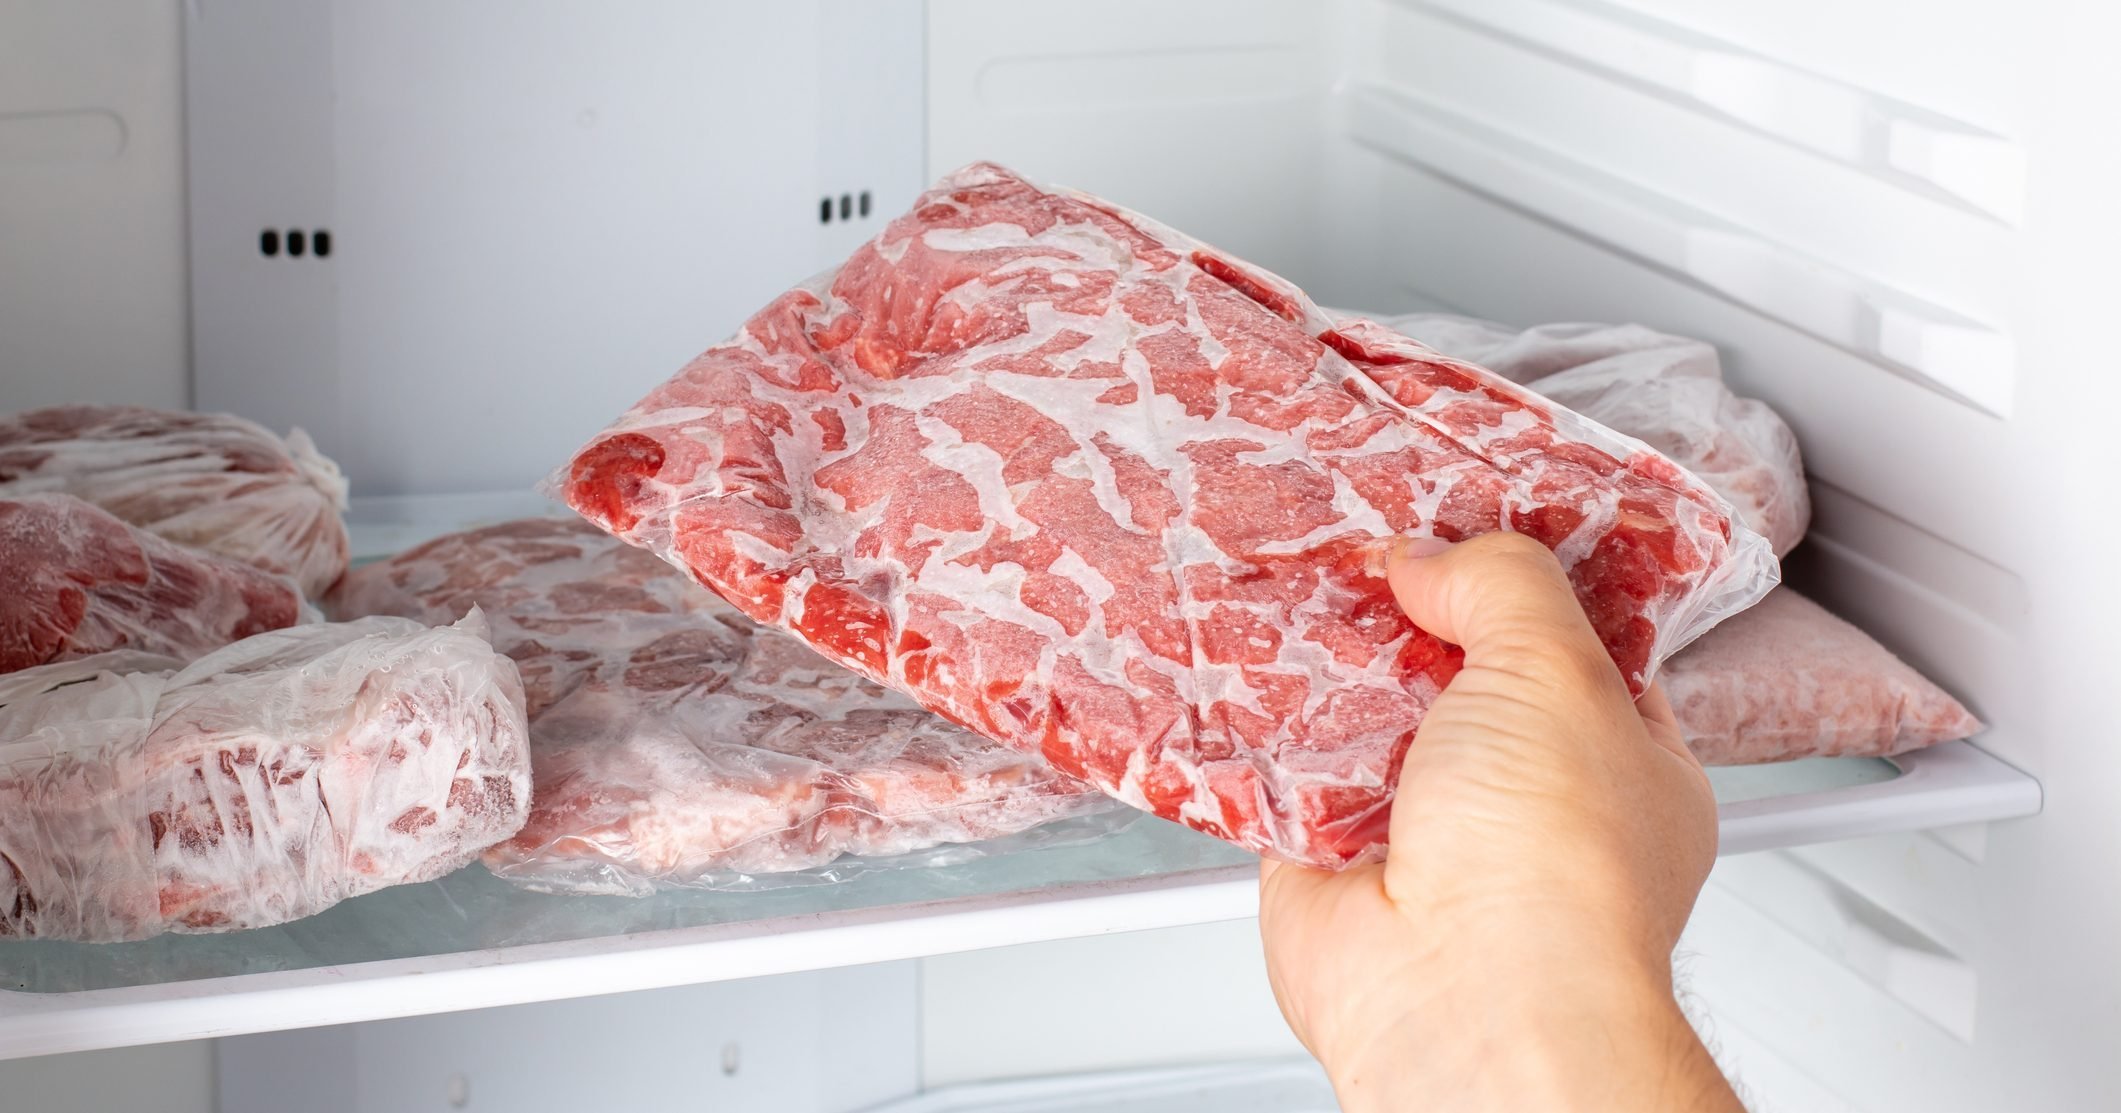 What to Avoid While Refreezing Food